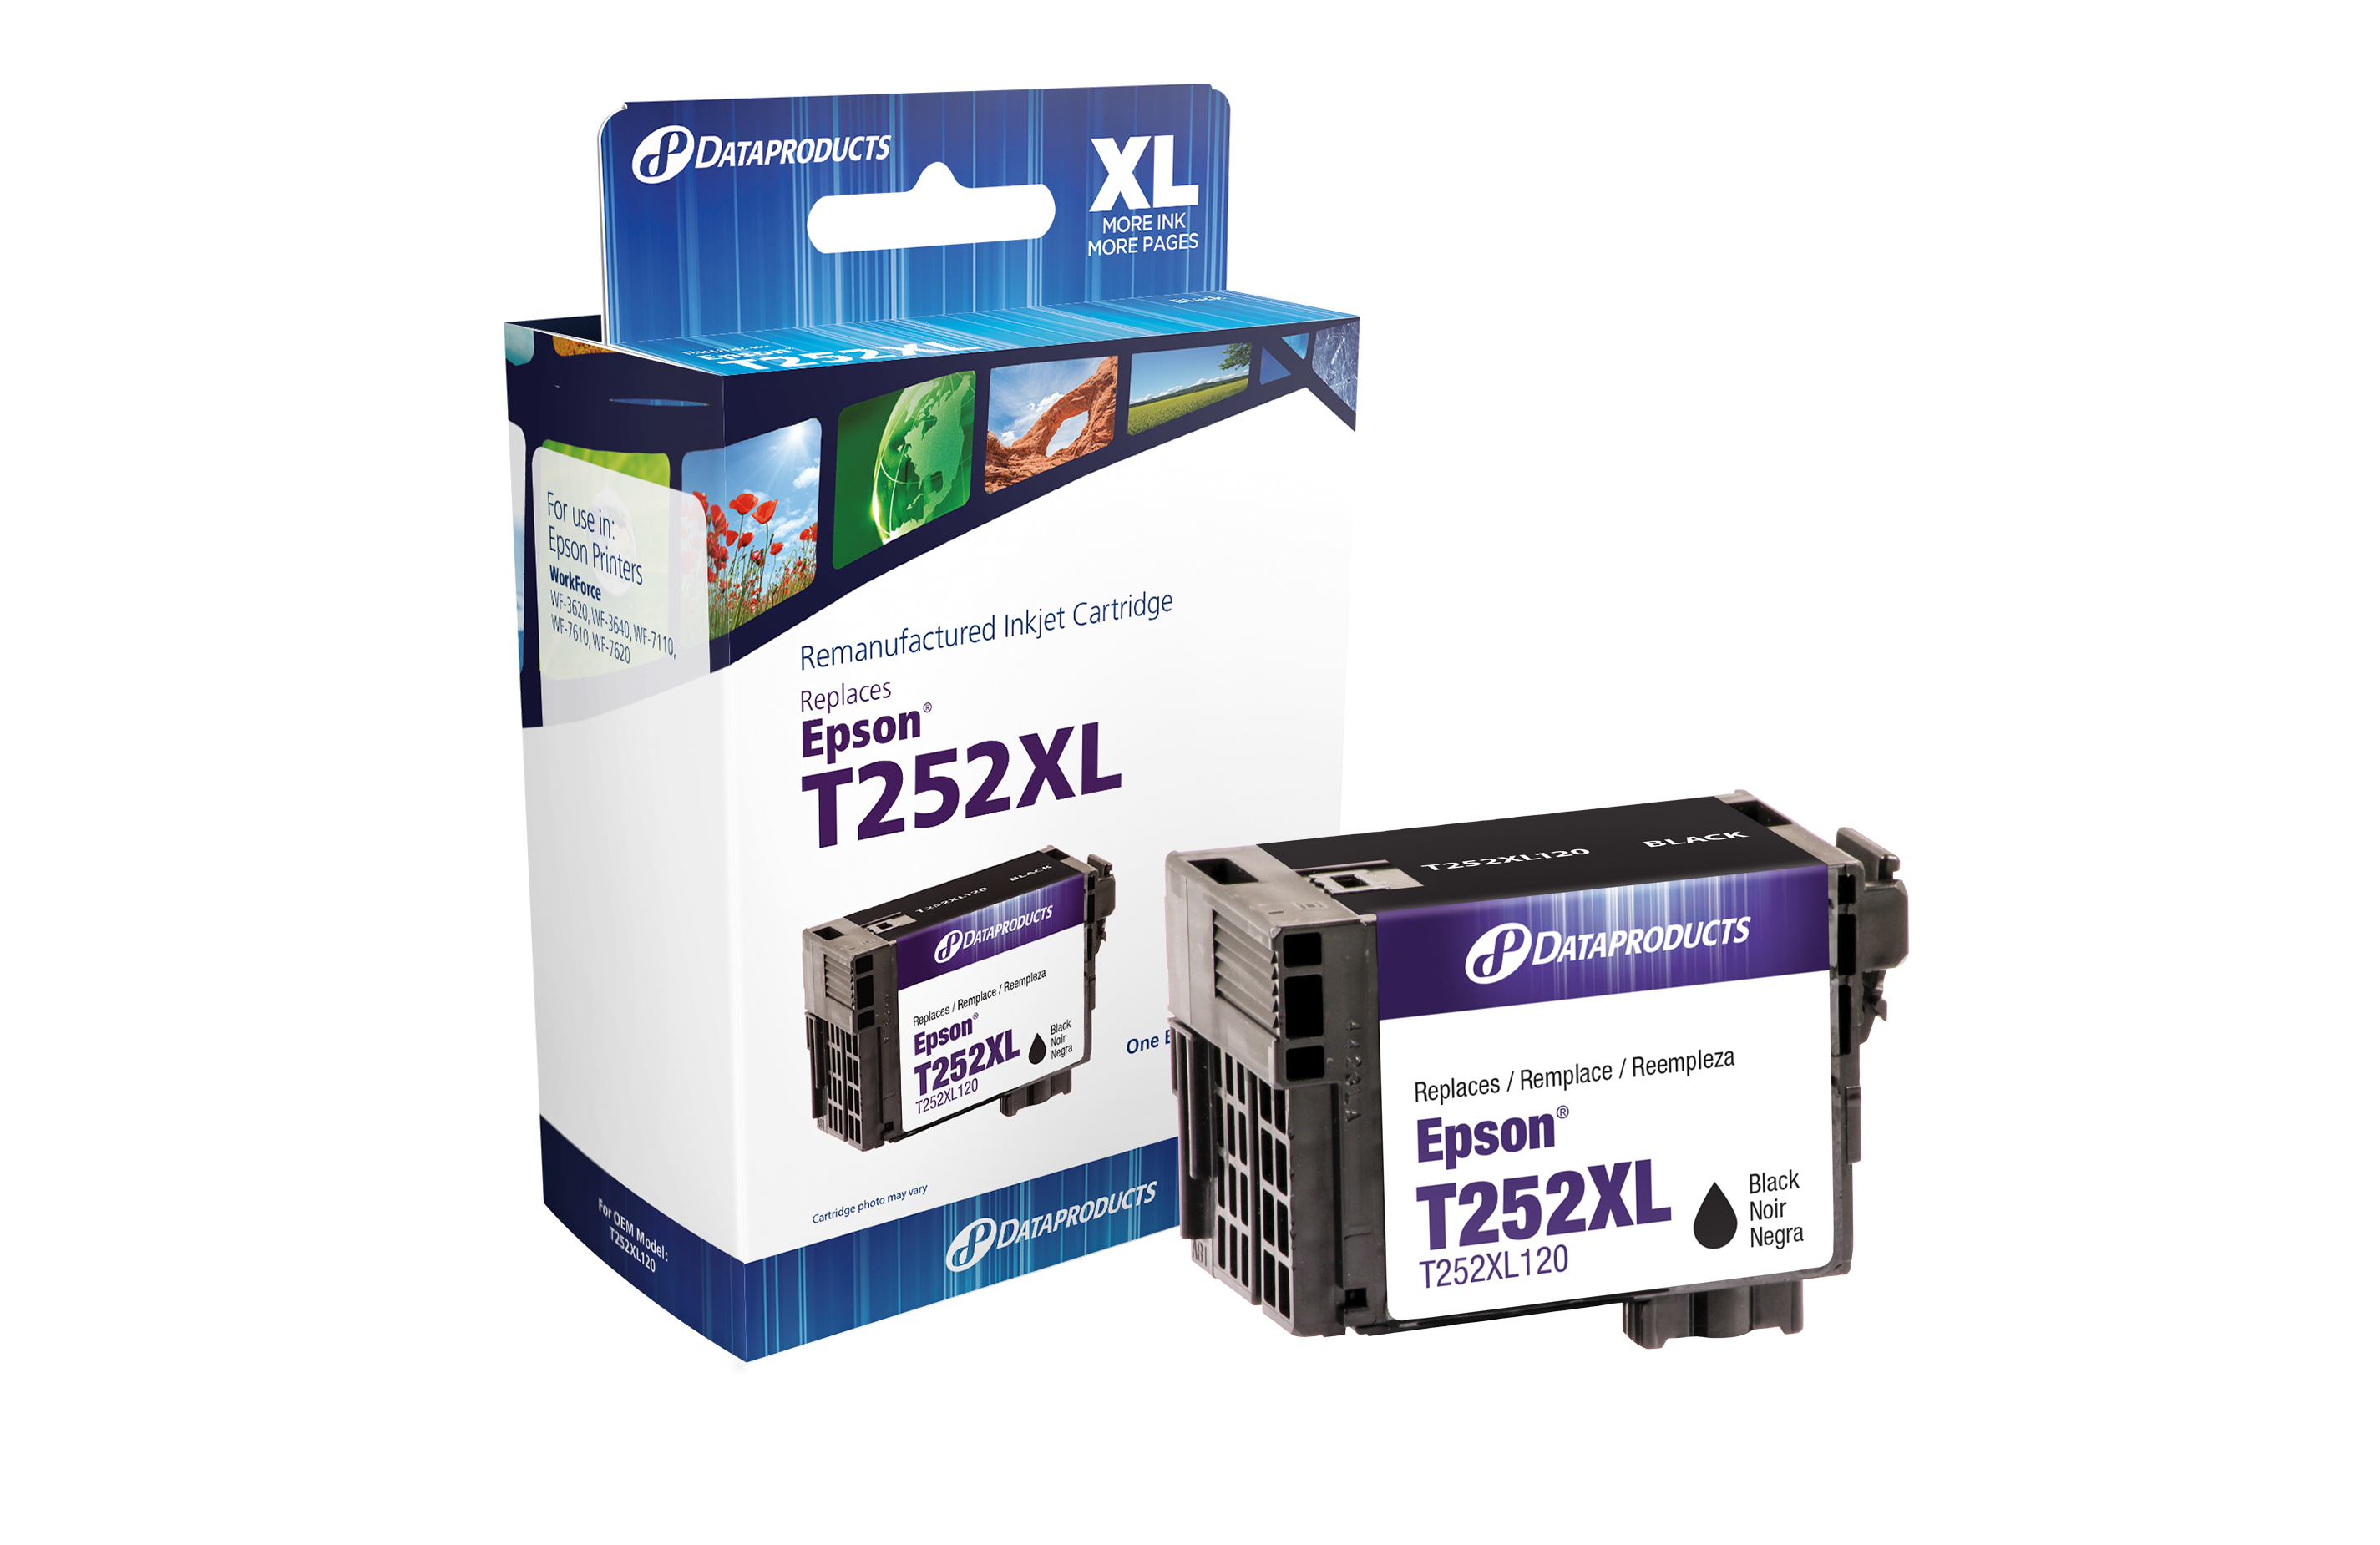 Dataproducts DPC252XL120 Remanufactured Epson T252XL High-Yield Black Ink